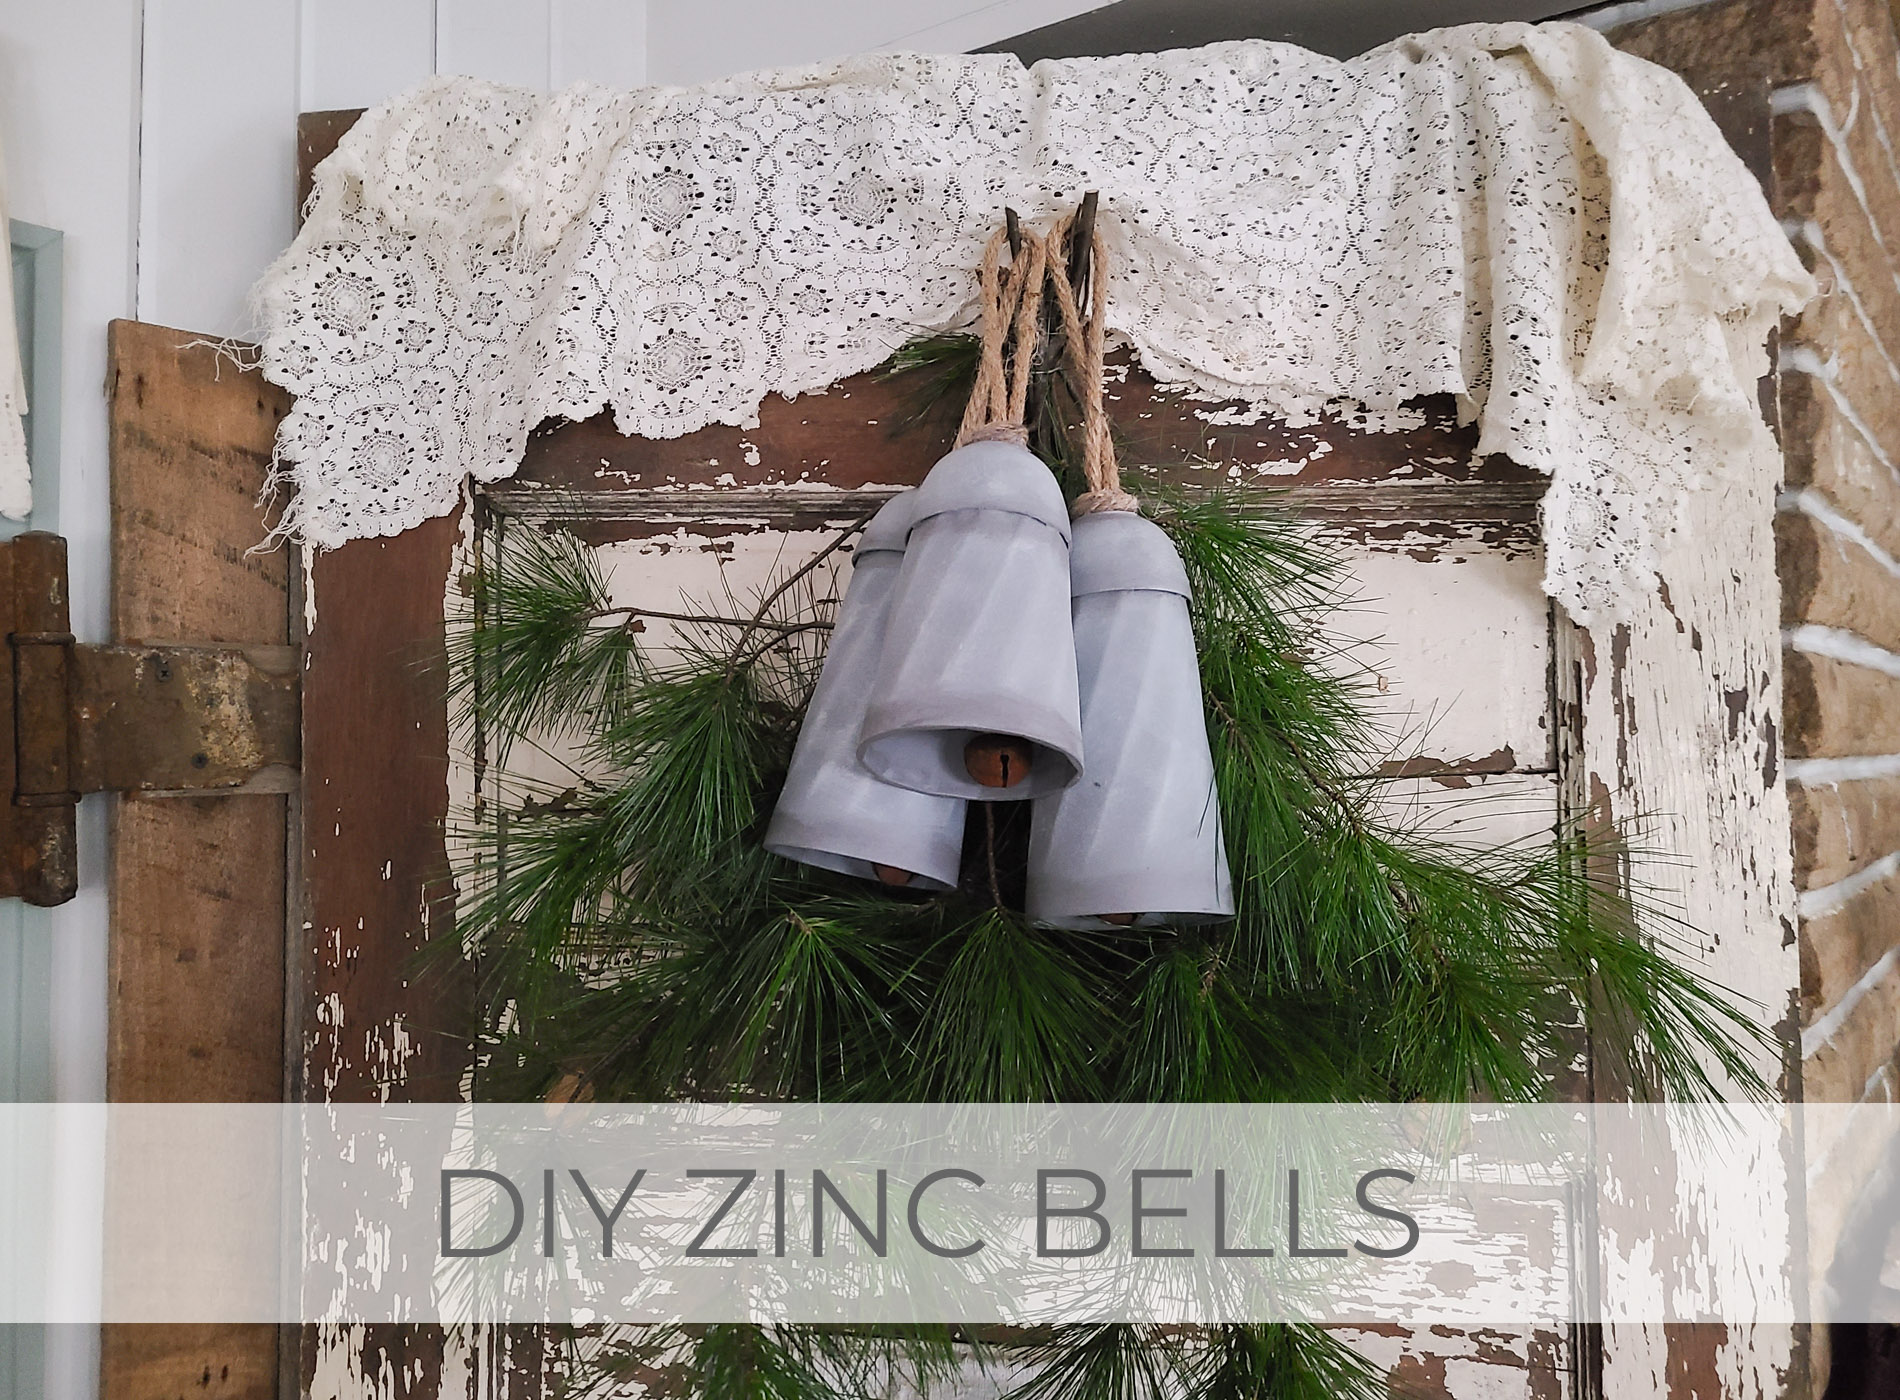 DIY Zinc Bells for Christmas by Larissa of Prodigal Pieces | prodigalpieces.com #prodigalpieces